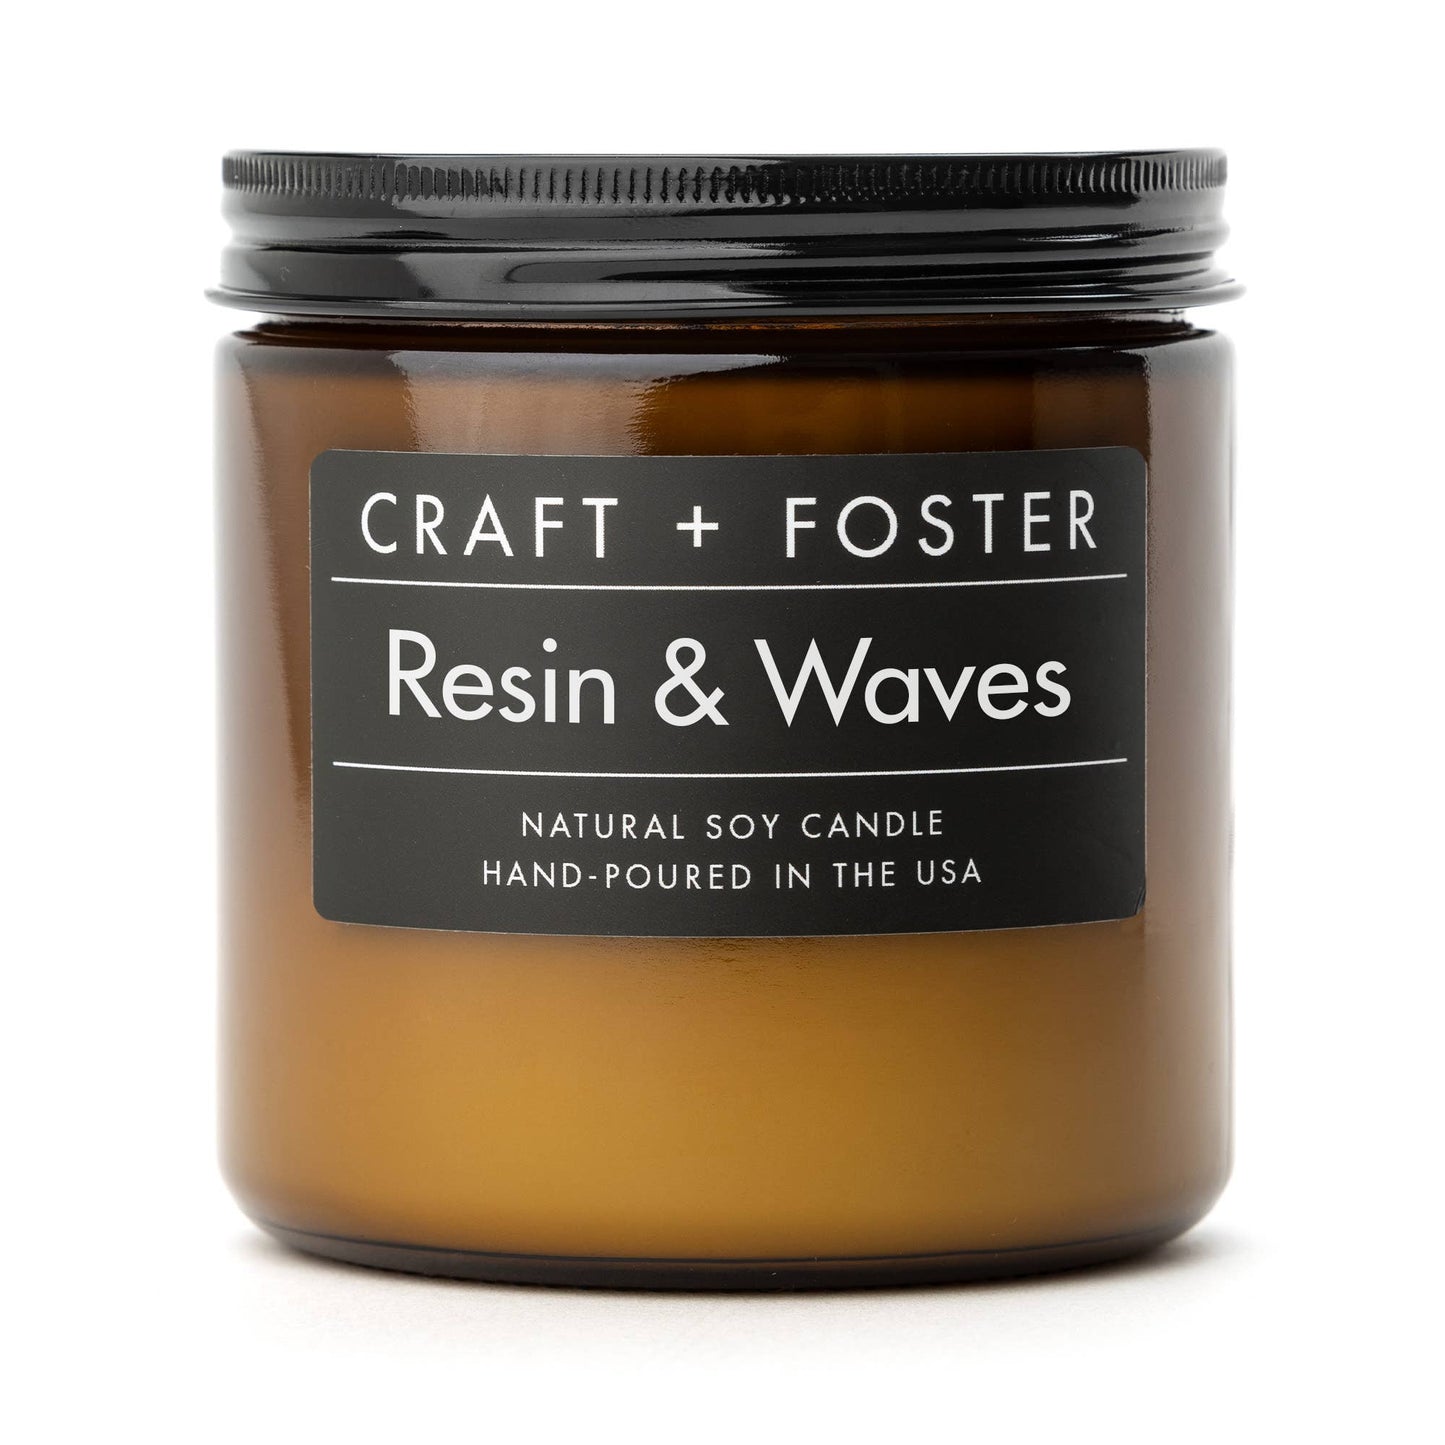 Resin & Waves - 12oz Natural Soy Candle